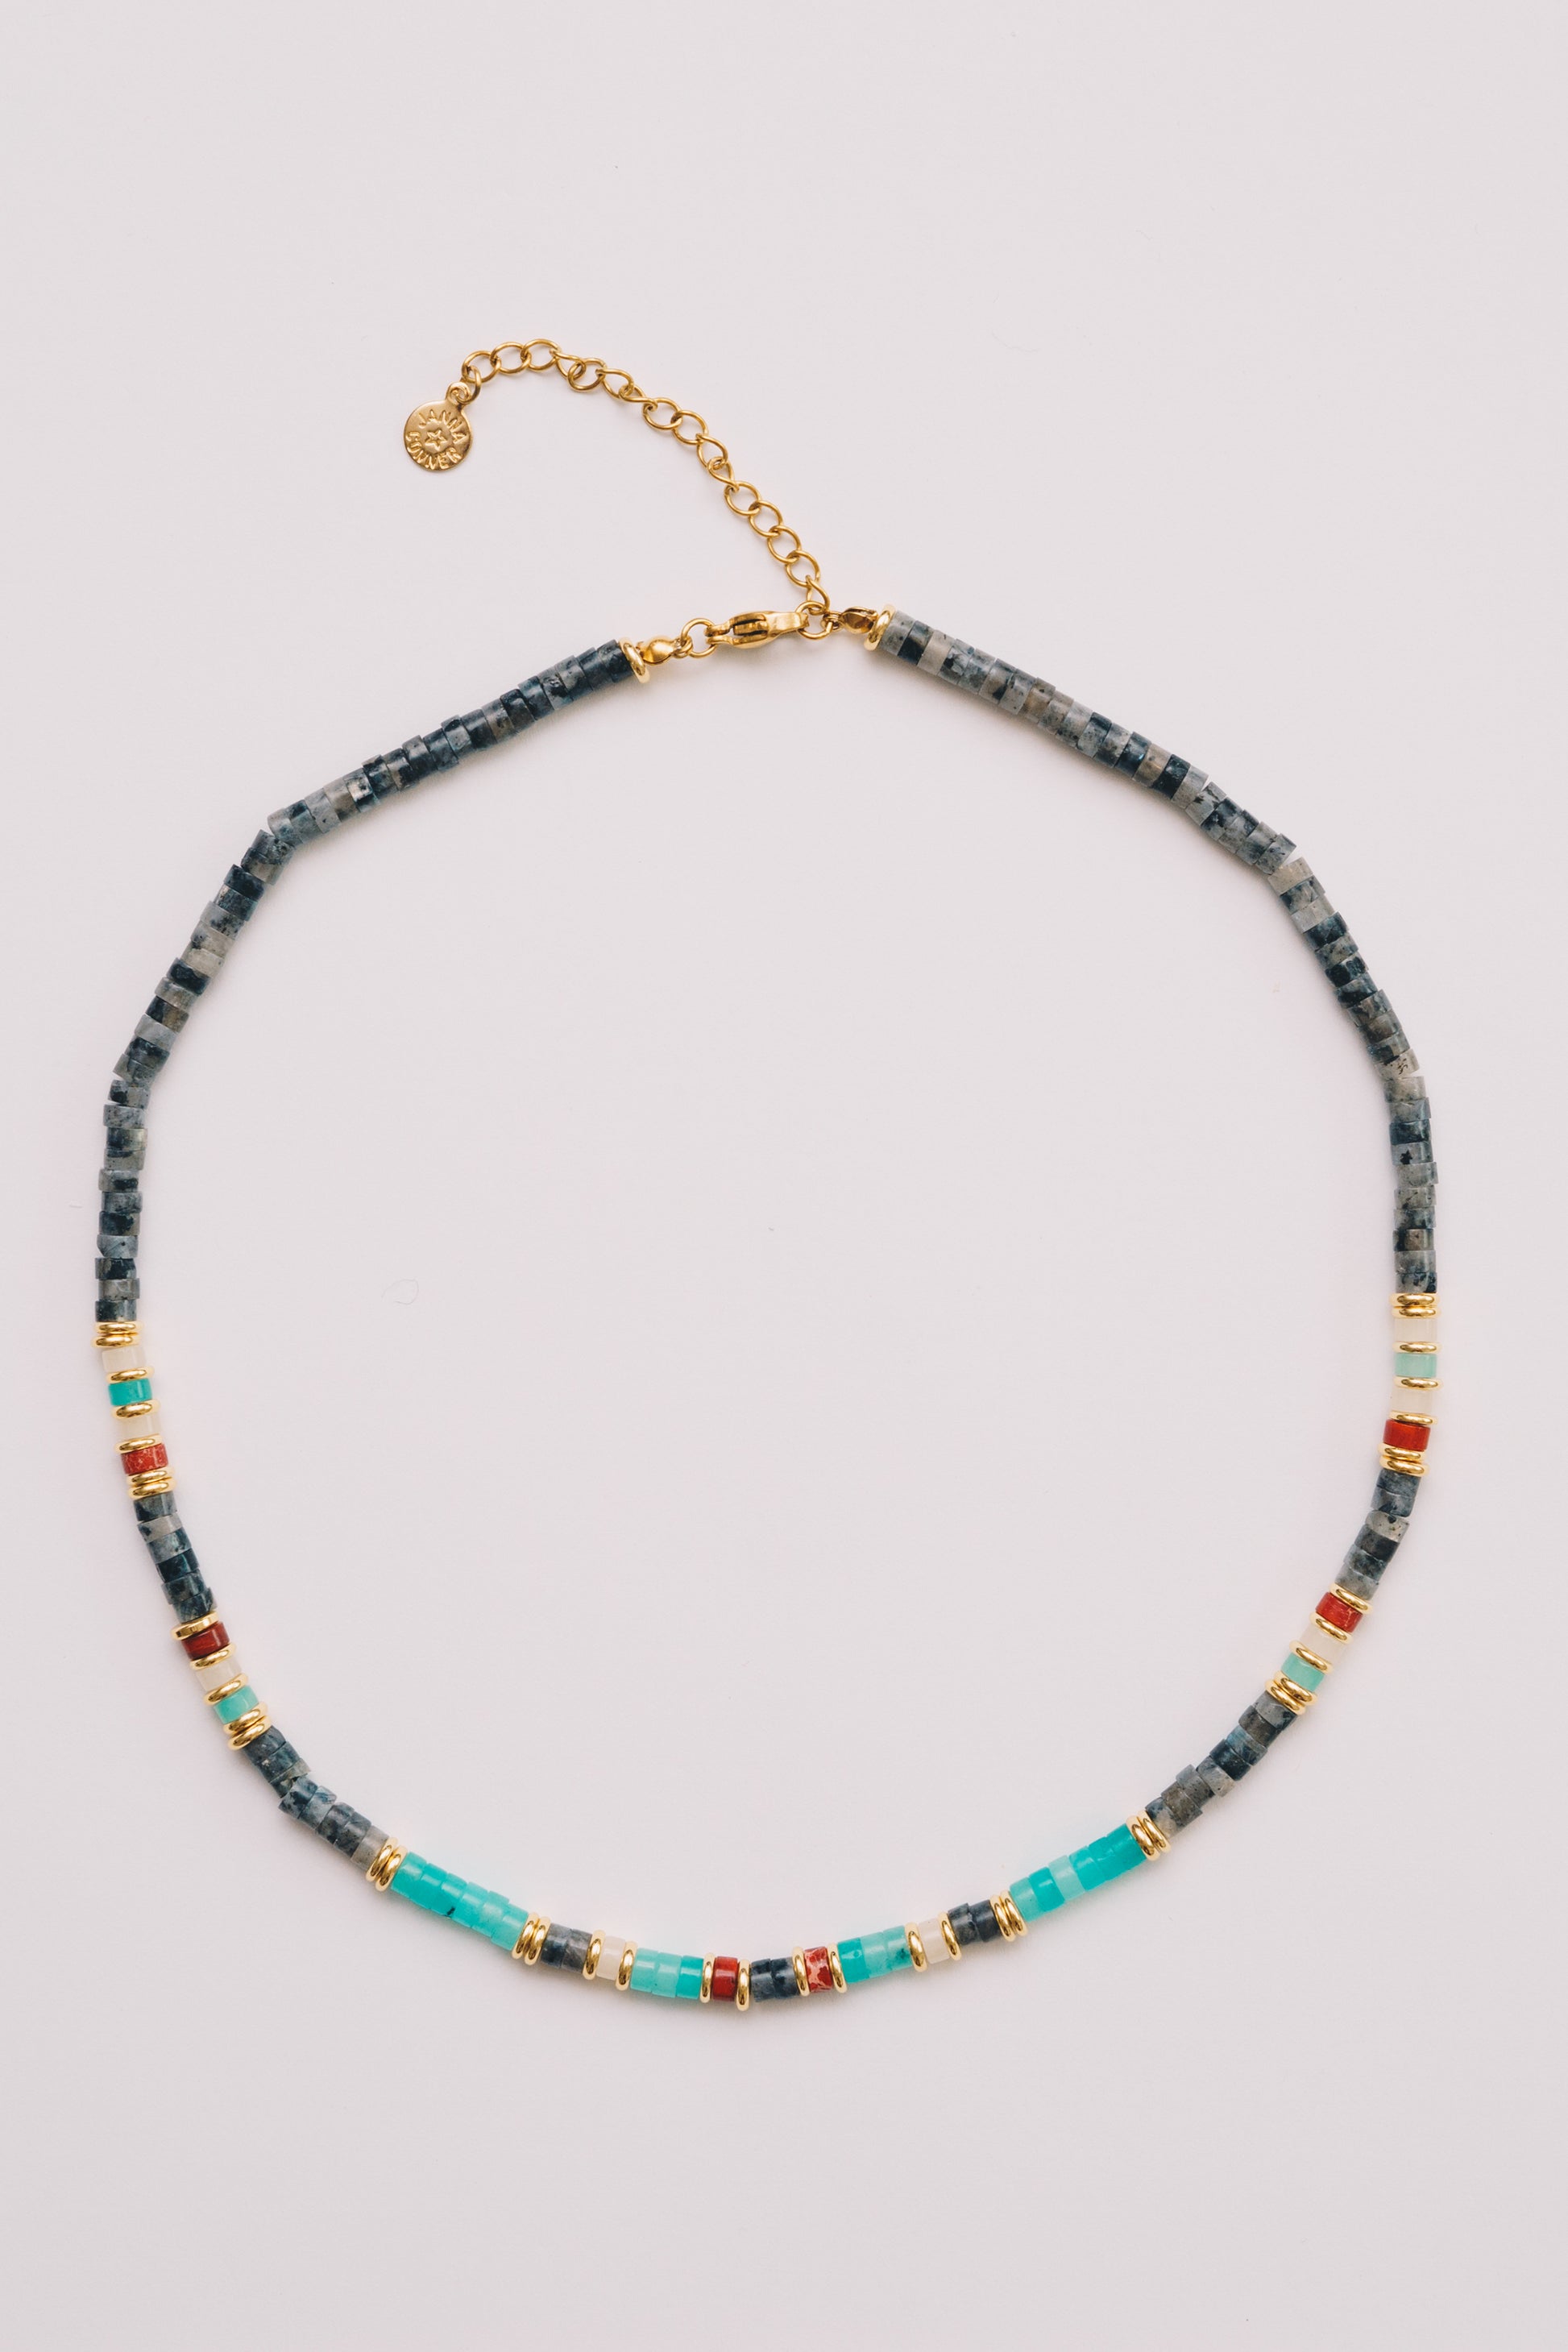 grey and turquoise beaded rondelle necklace on white background